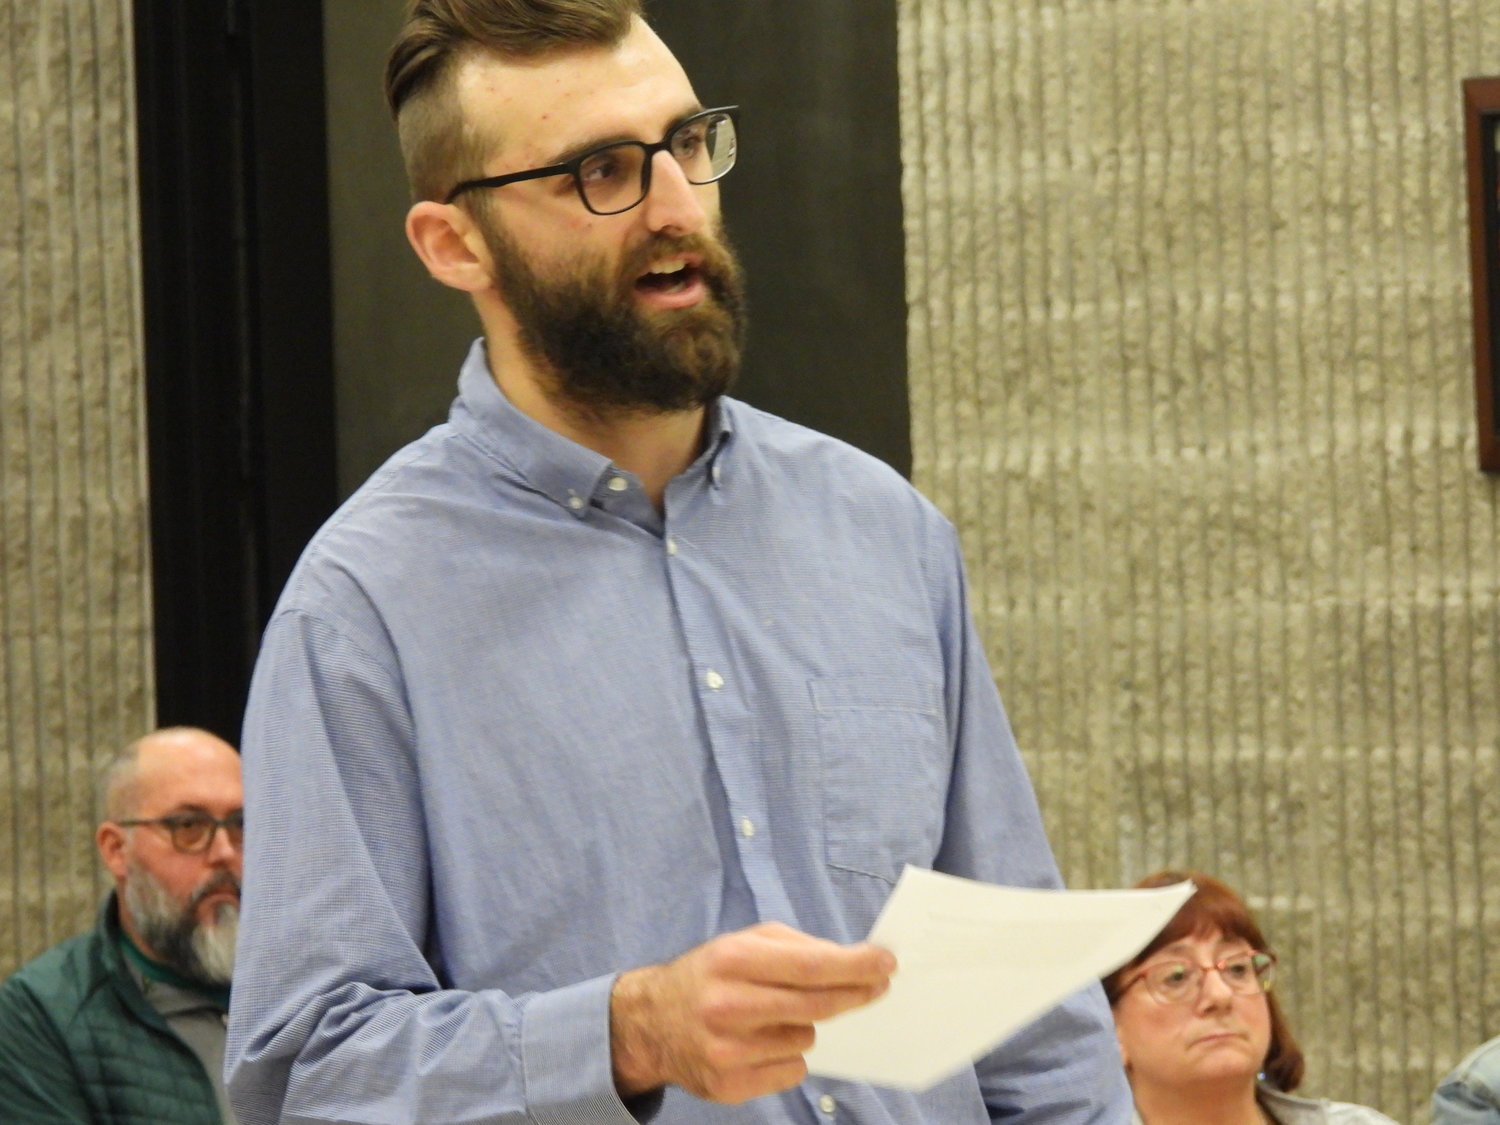 POTENTIAL TAX REVENUE — Jacob Cornell, co-owner of Cornell’s Greenhaus in Oneida, encourages members of the city council to opt-in and allow dispensaries in the Oneida, citing around $200,000 in potential tax revenue.